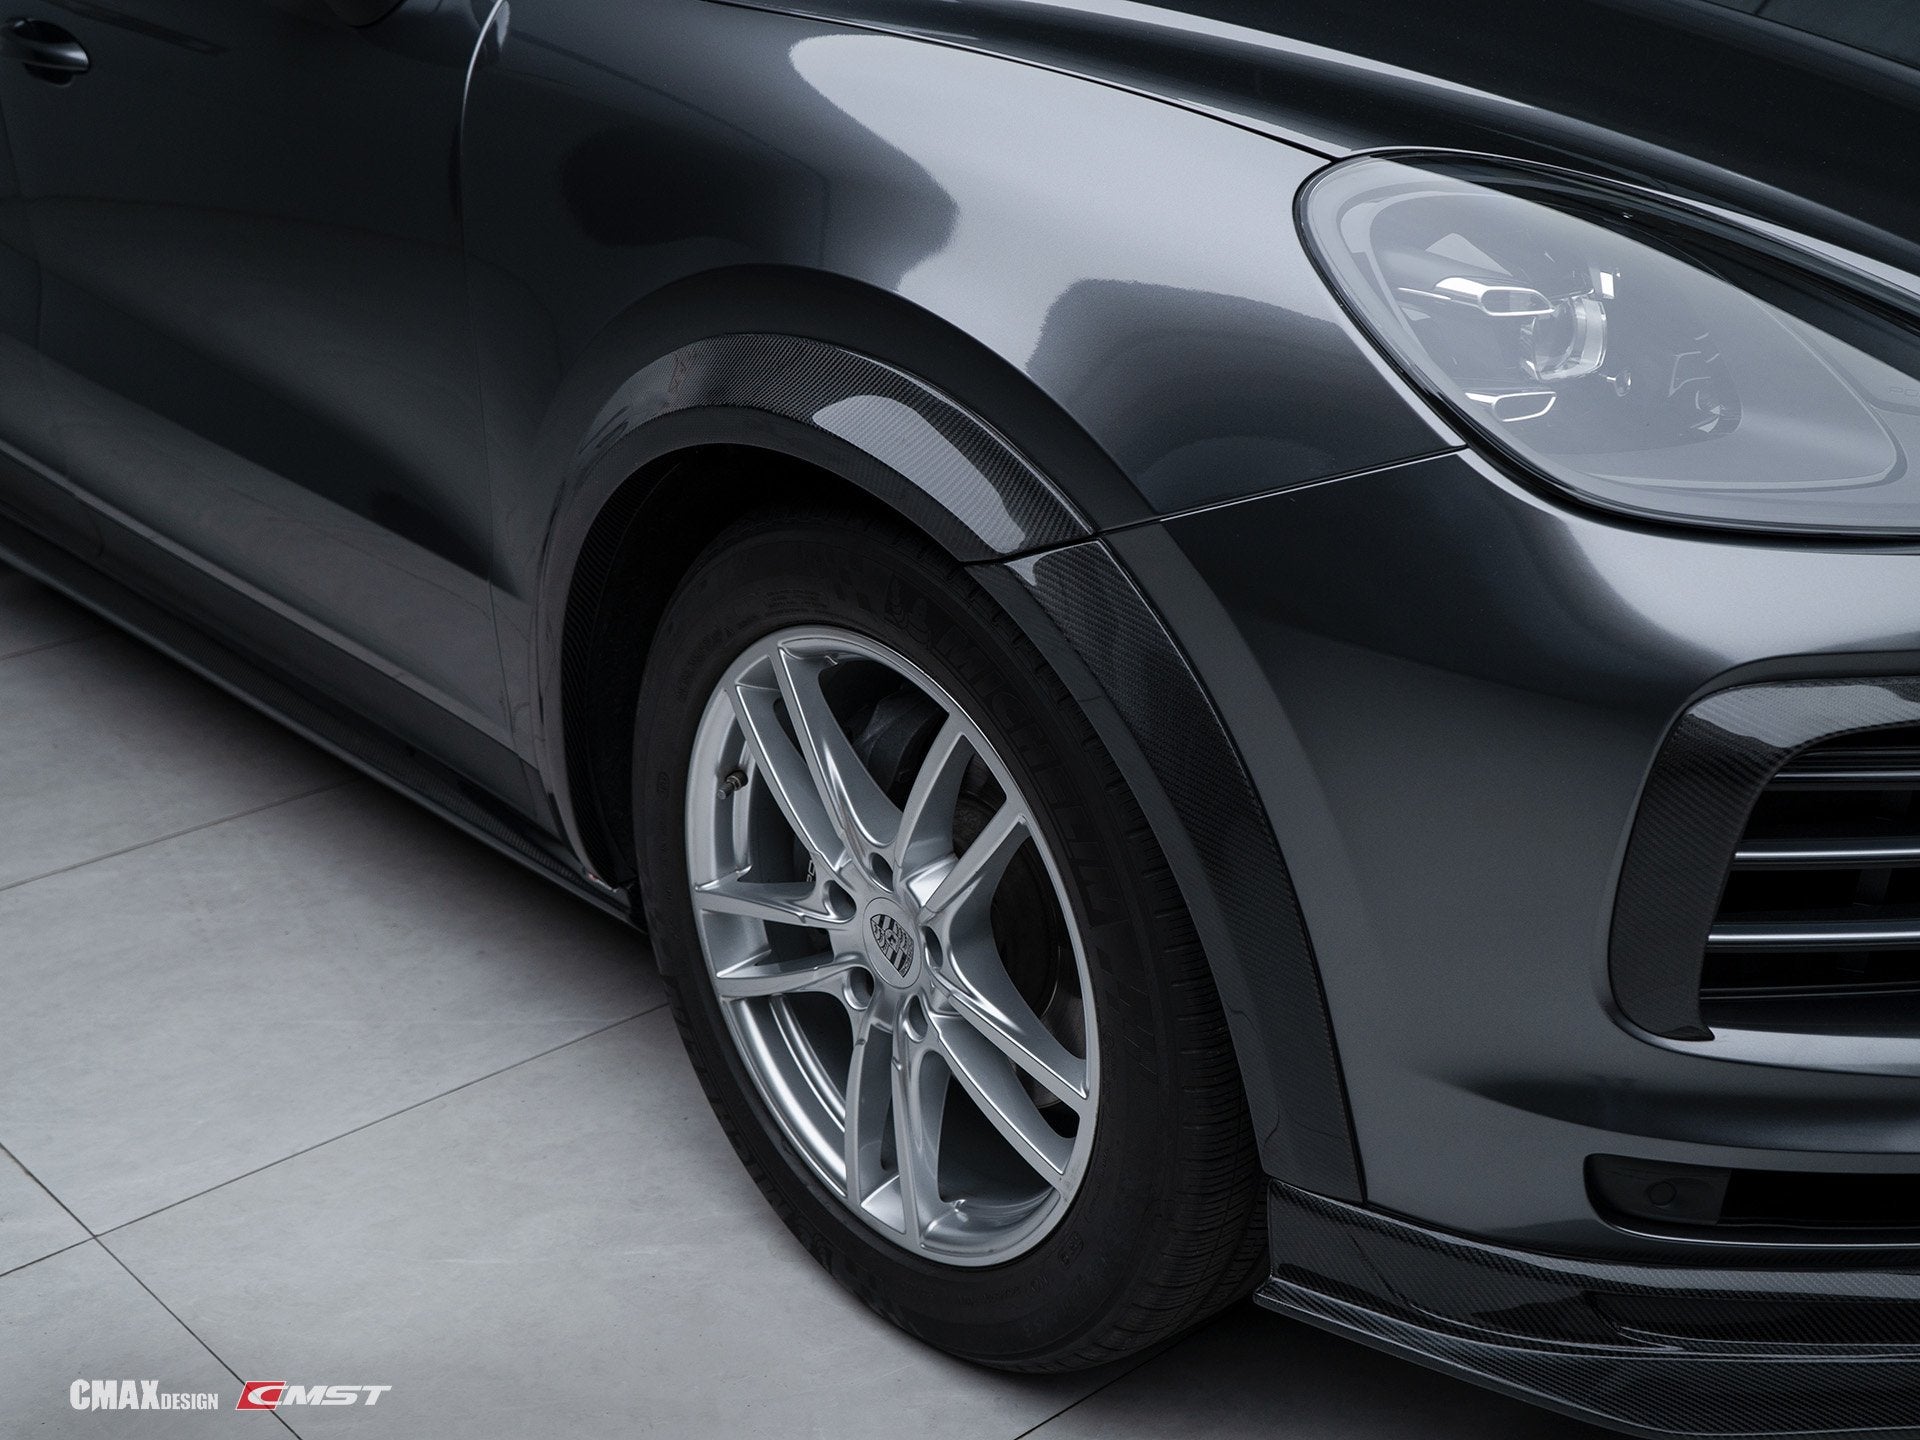 Check our price and buy CMST Carbon Fiber Body Kit set Style for Porsche Cayenne 9Y0